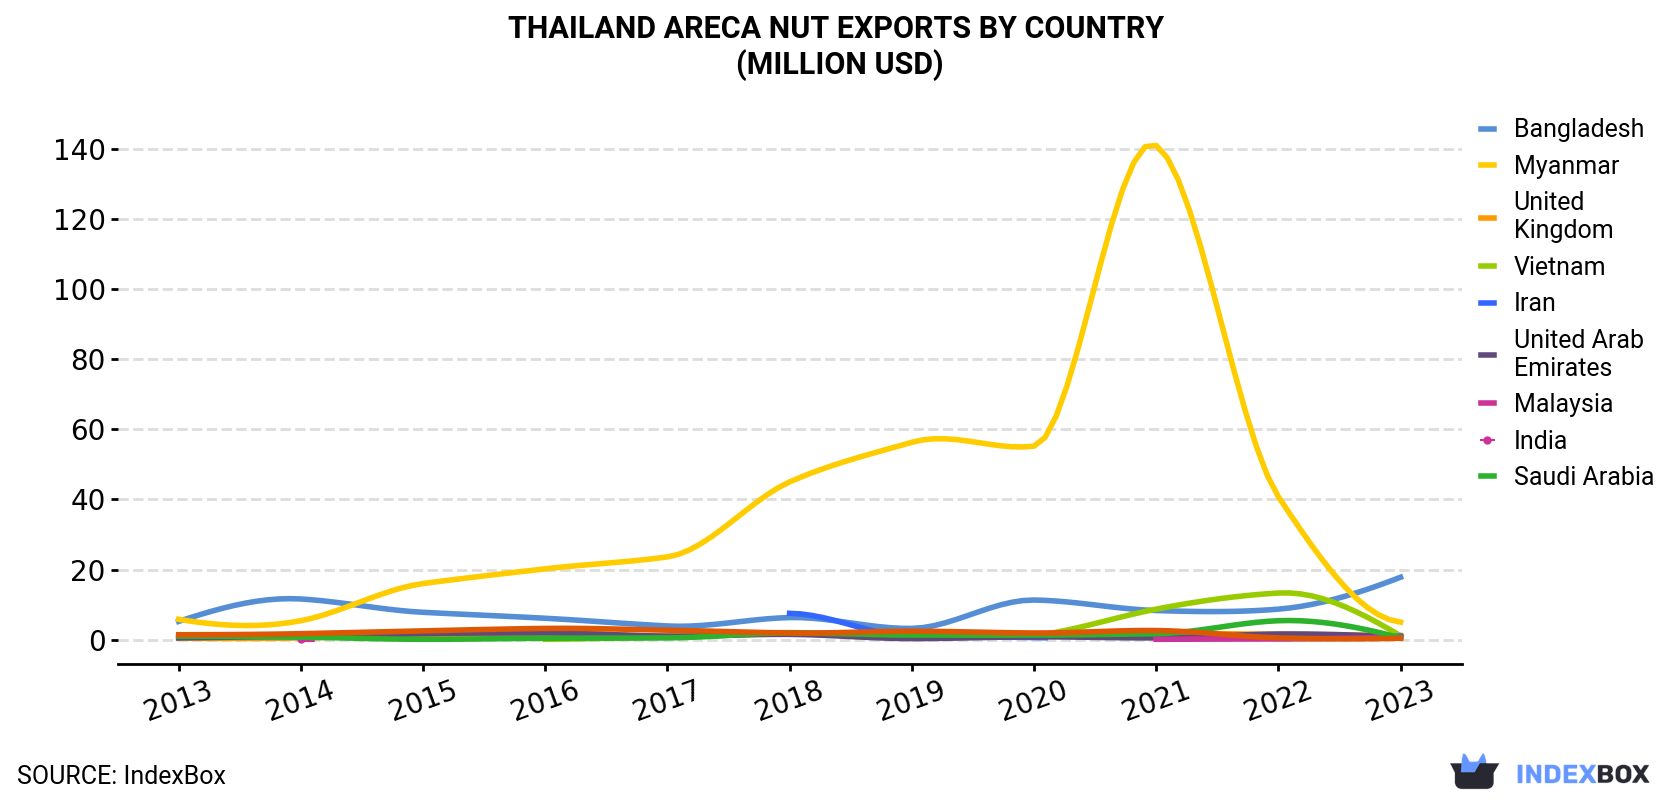 Thailand Areca Nut Exports By Country (Million USD)